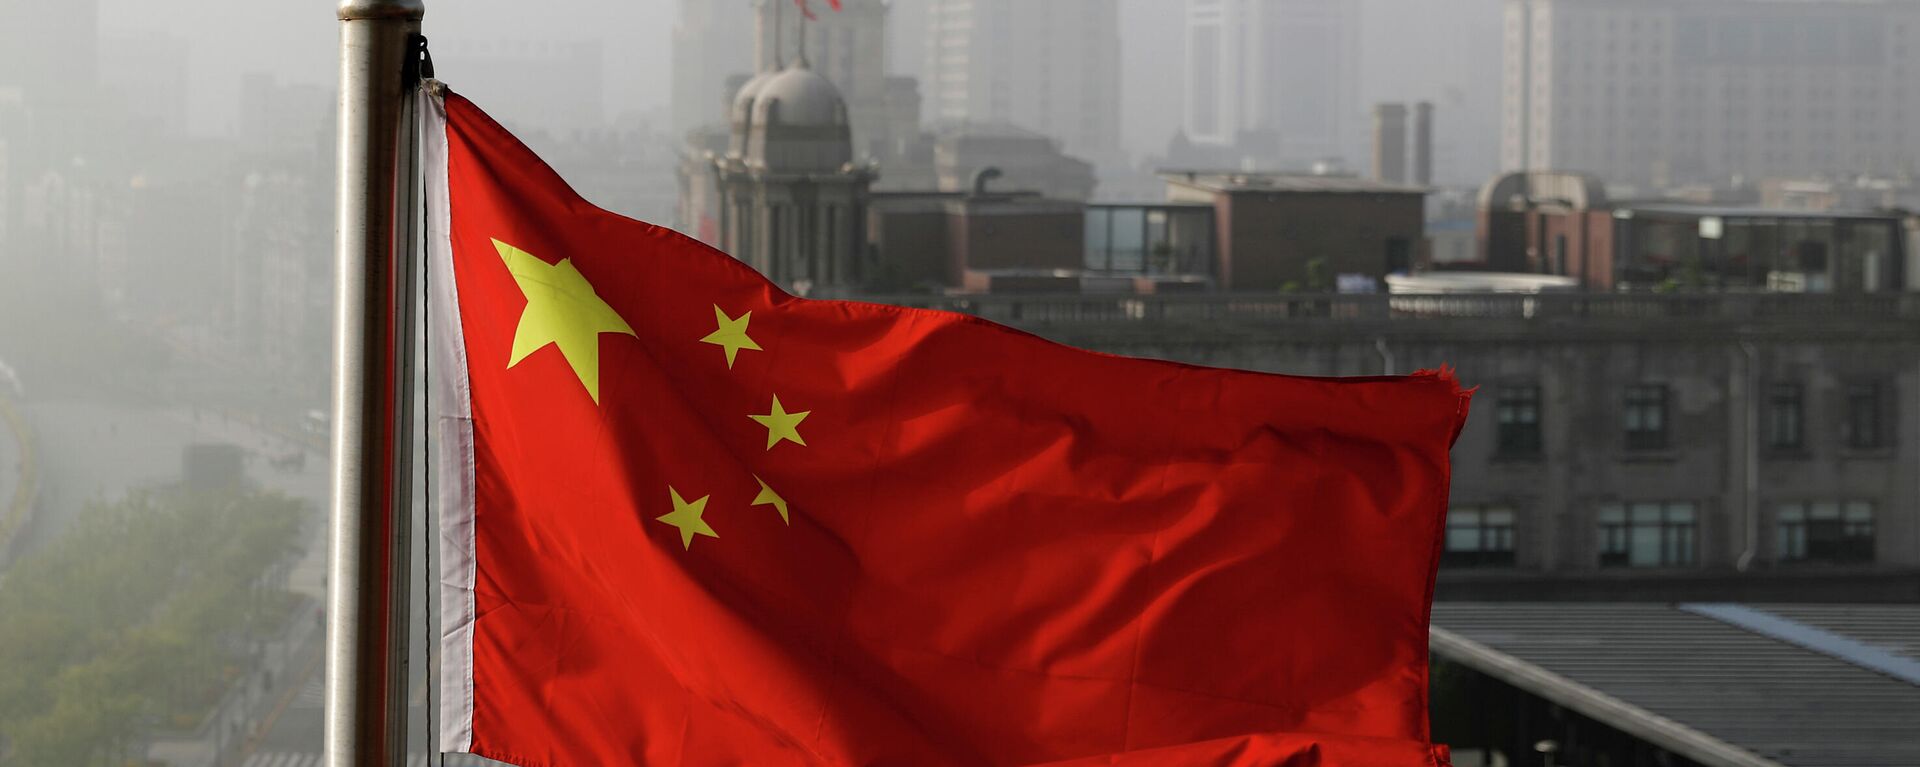 In this April 14, 2016 file photo, a Chinese national flag flutters against the office buildings in Shanghai, China.  - Sputnik International, 1920, 19.06.2023